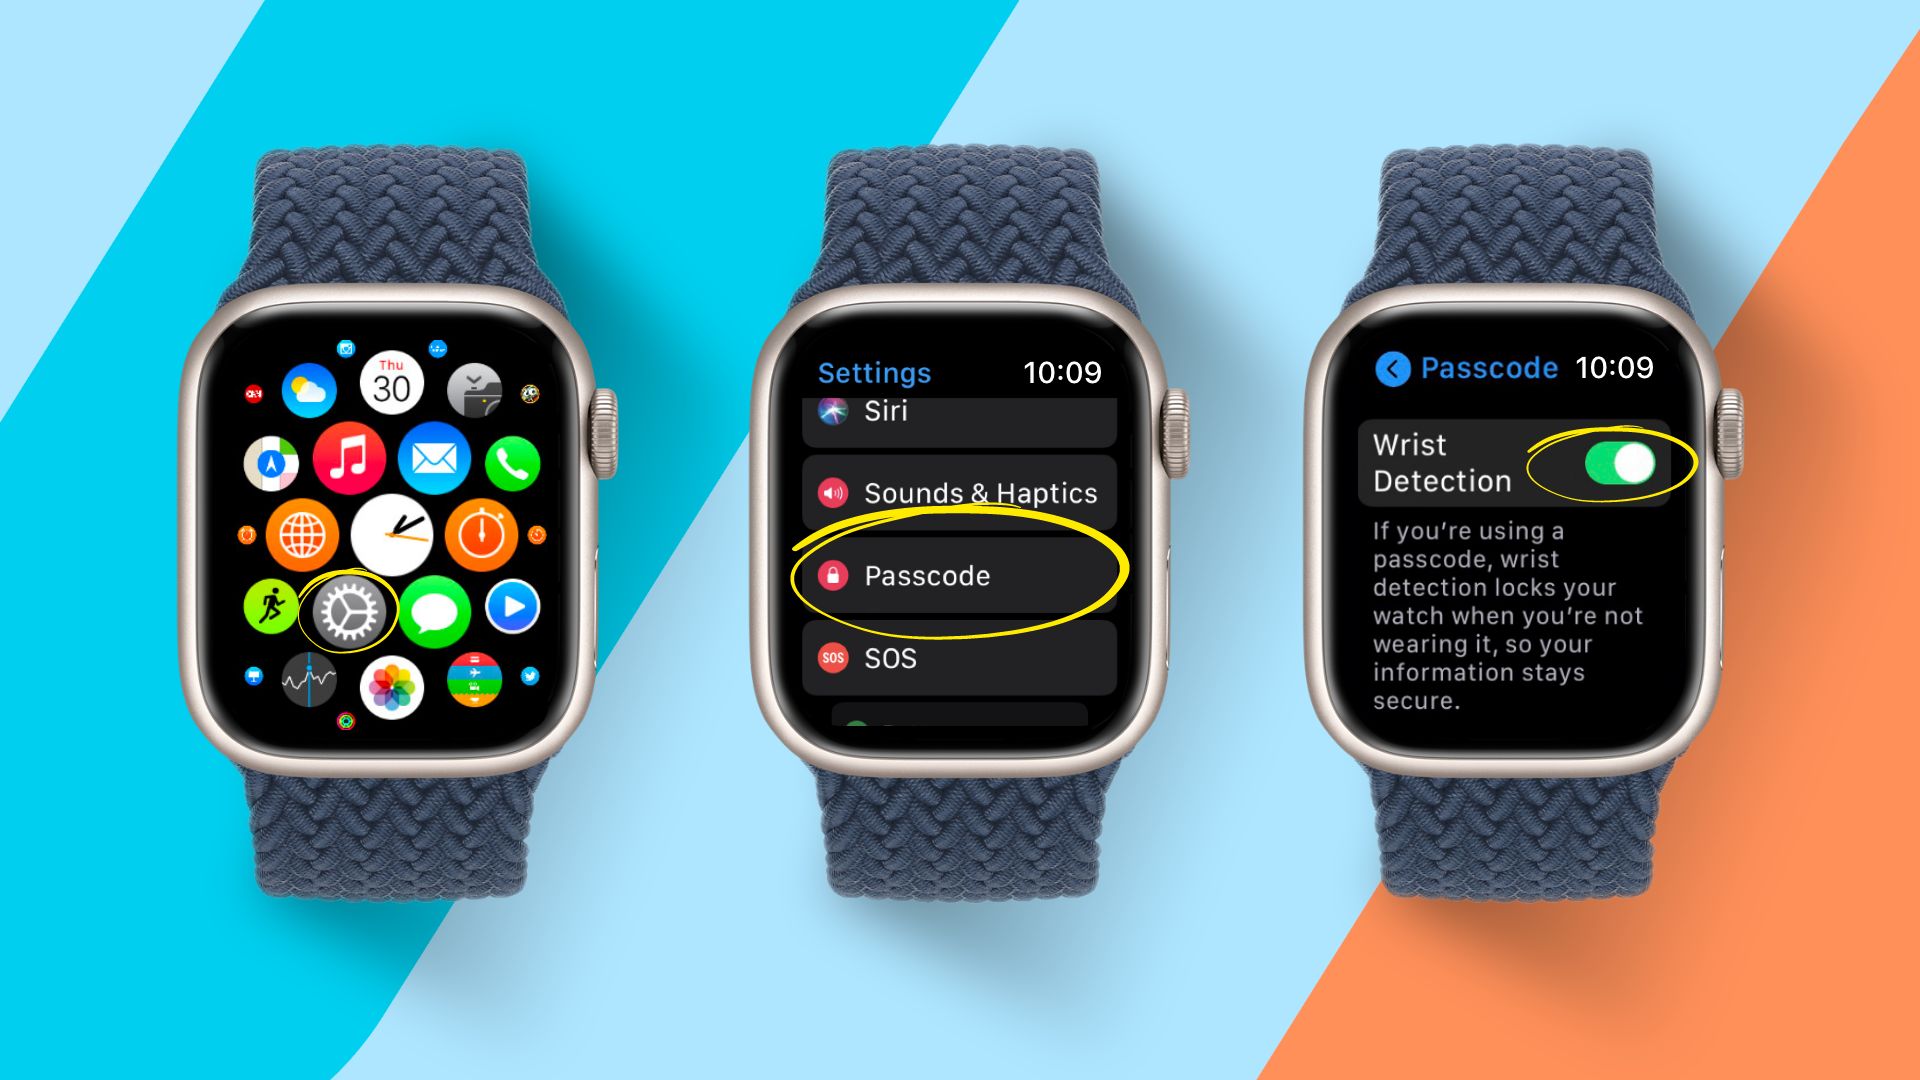 How to unlock Apple Watch automatically through Wrist Detection